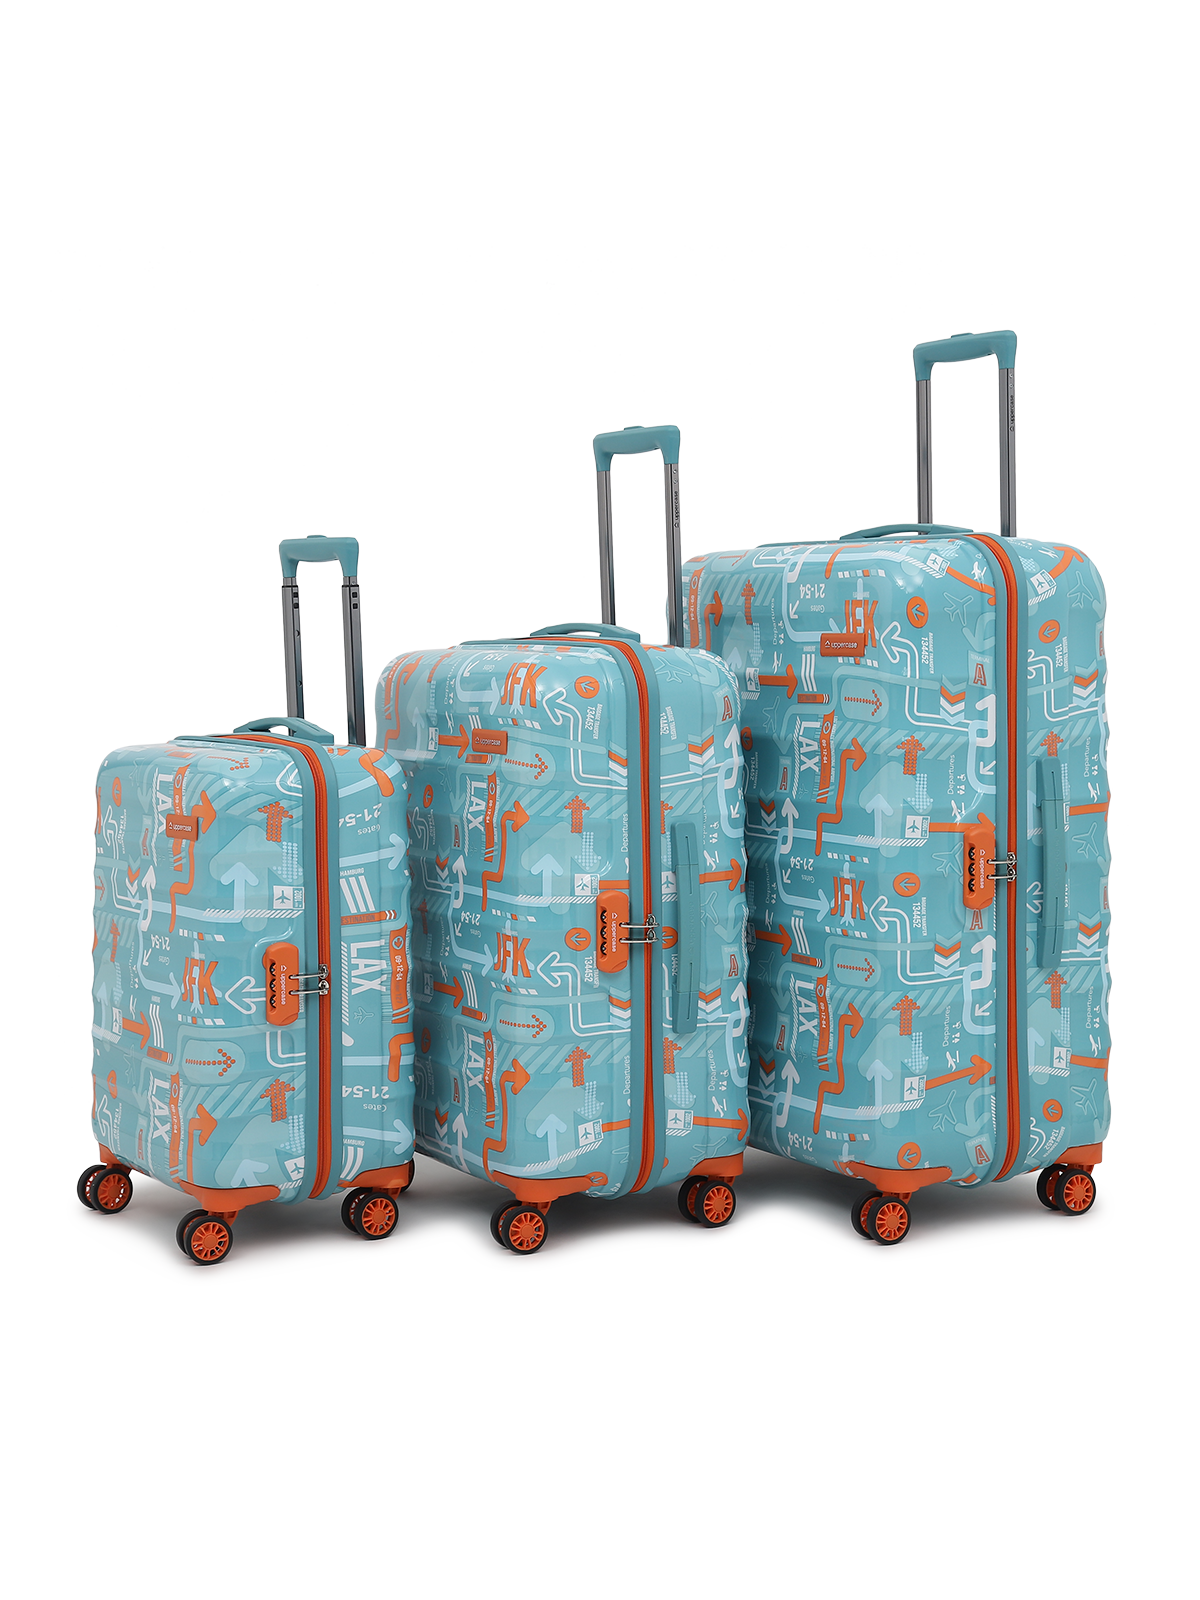 uppercase JFK Cabin n Check in Combination Lock Hard Trolley Set of 3 Teal Blue